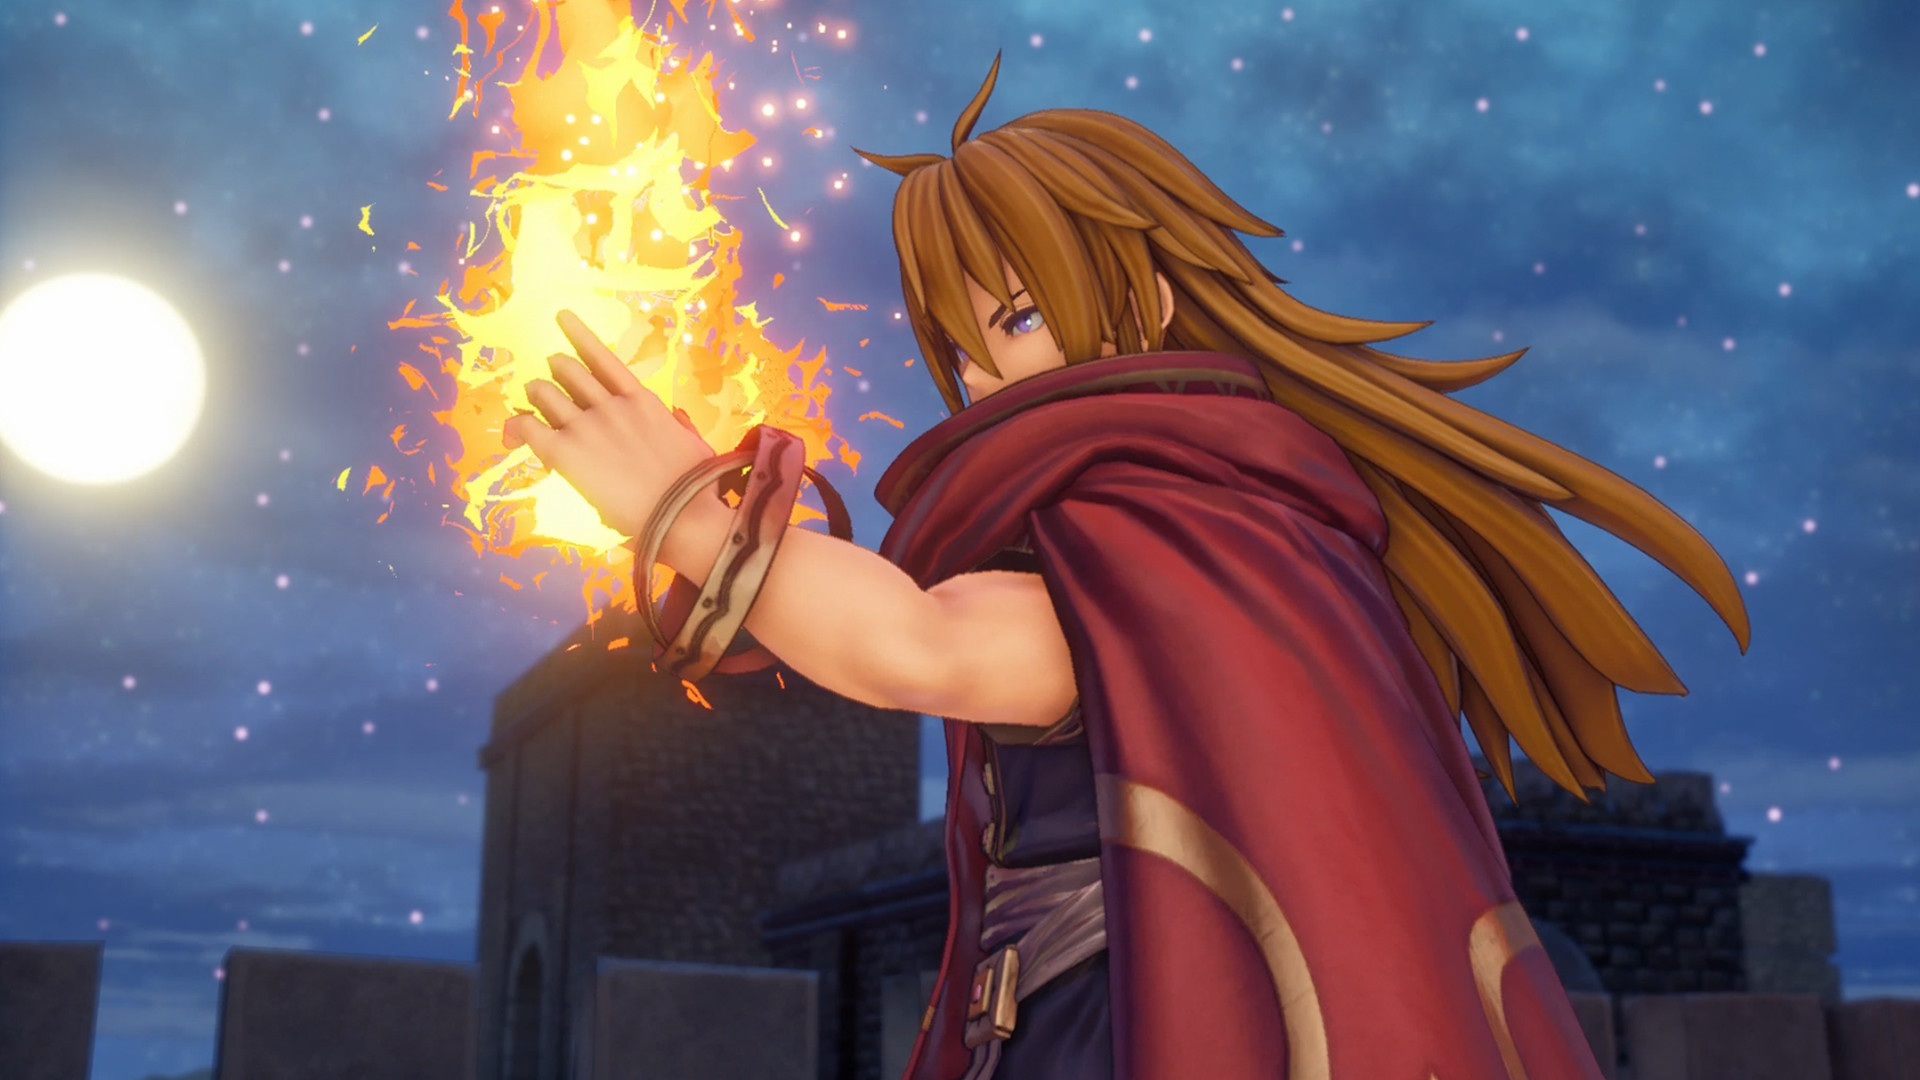 Trials of Mana Free Download